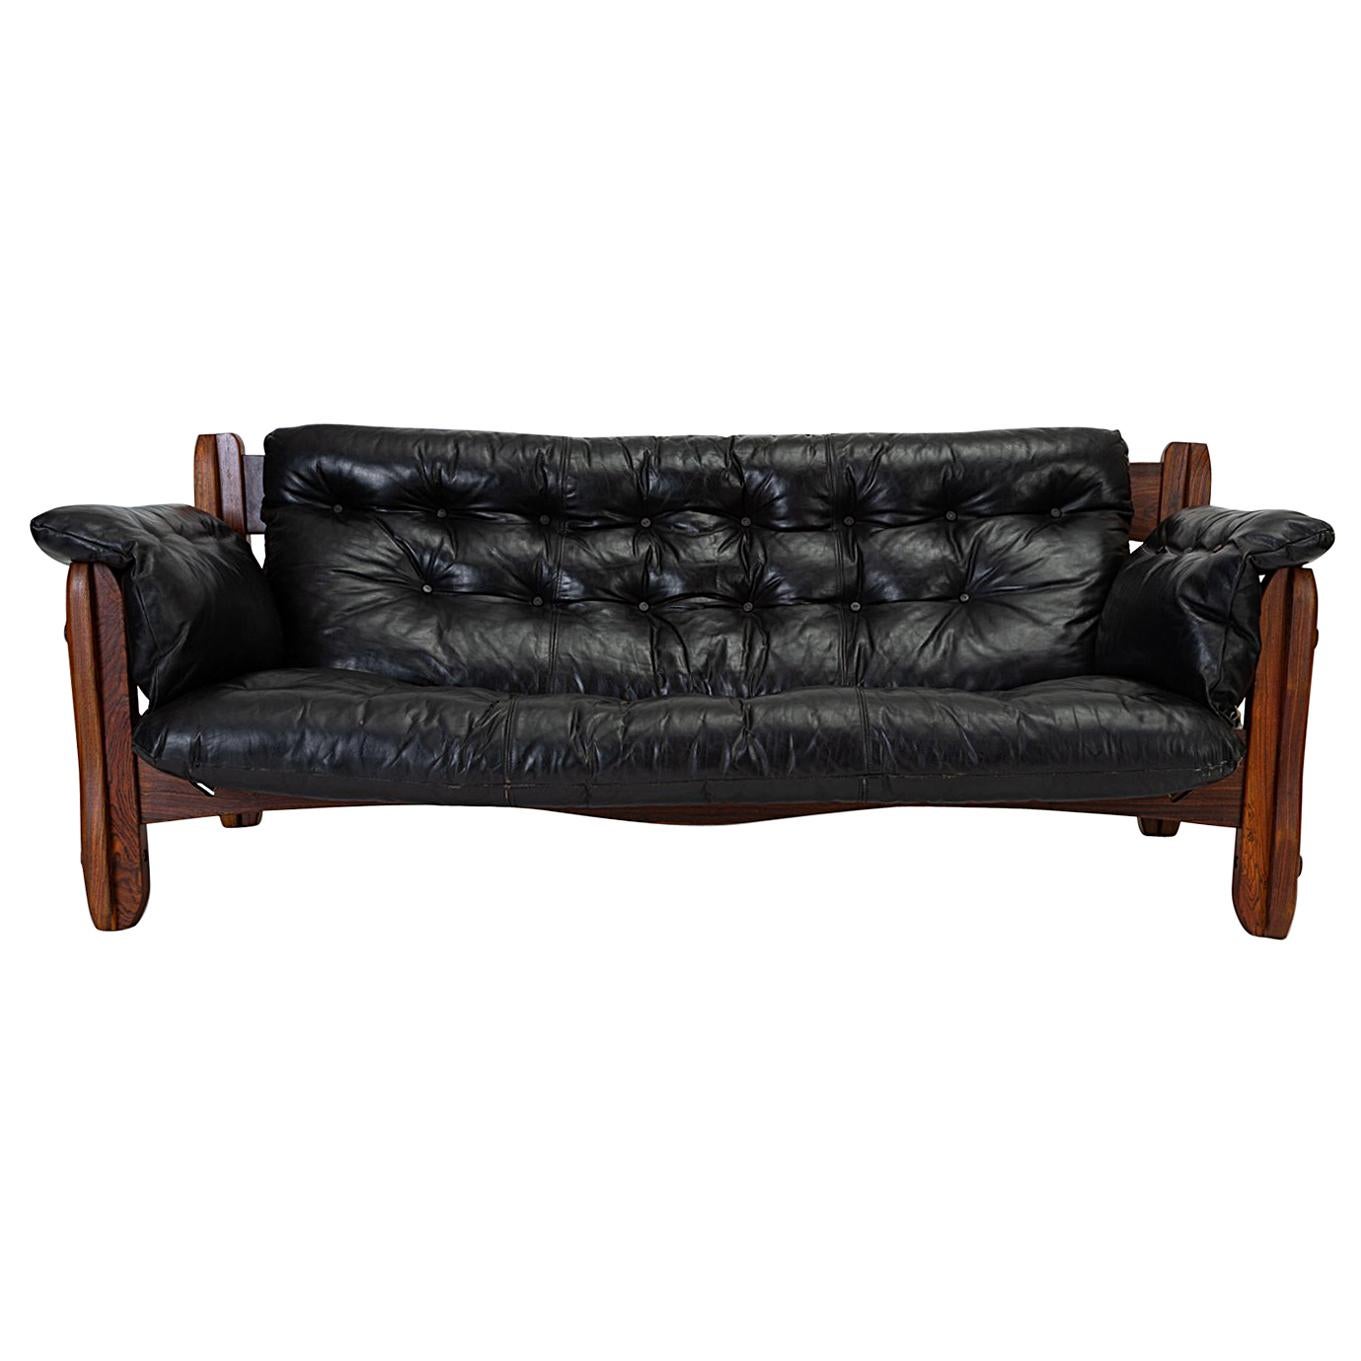 Descanso Sofa by Don Shoemaker for Señal in Cueramo and Leather